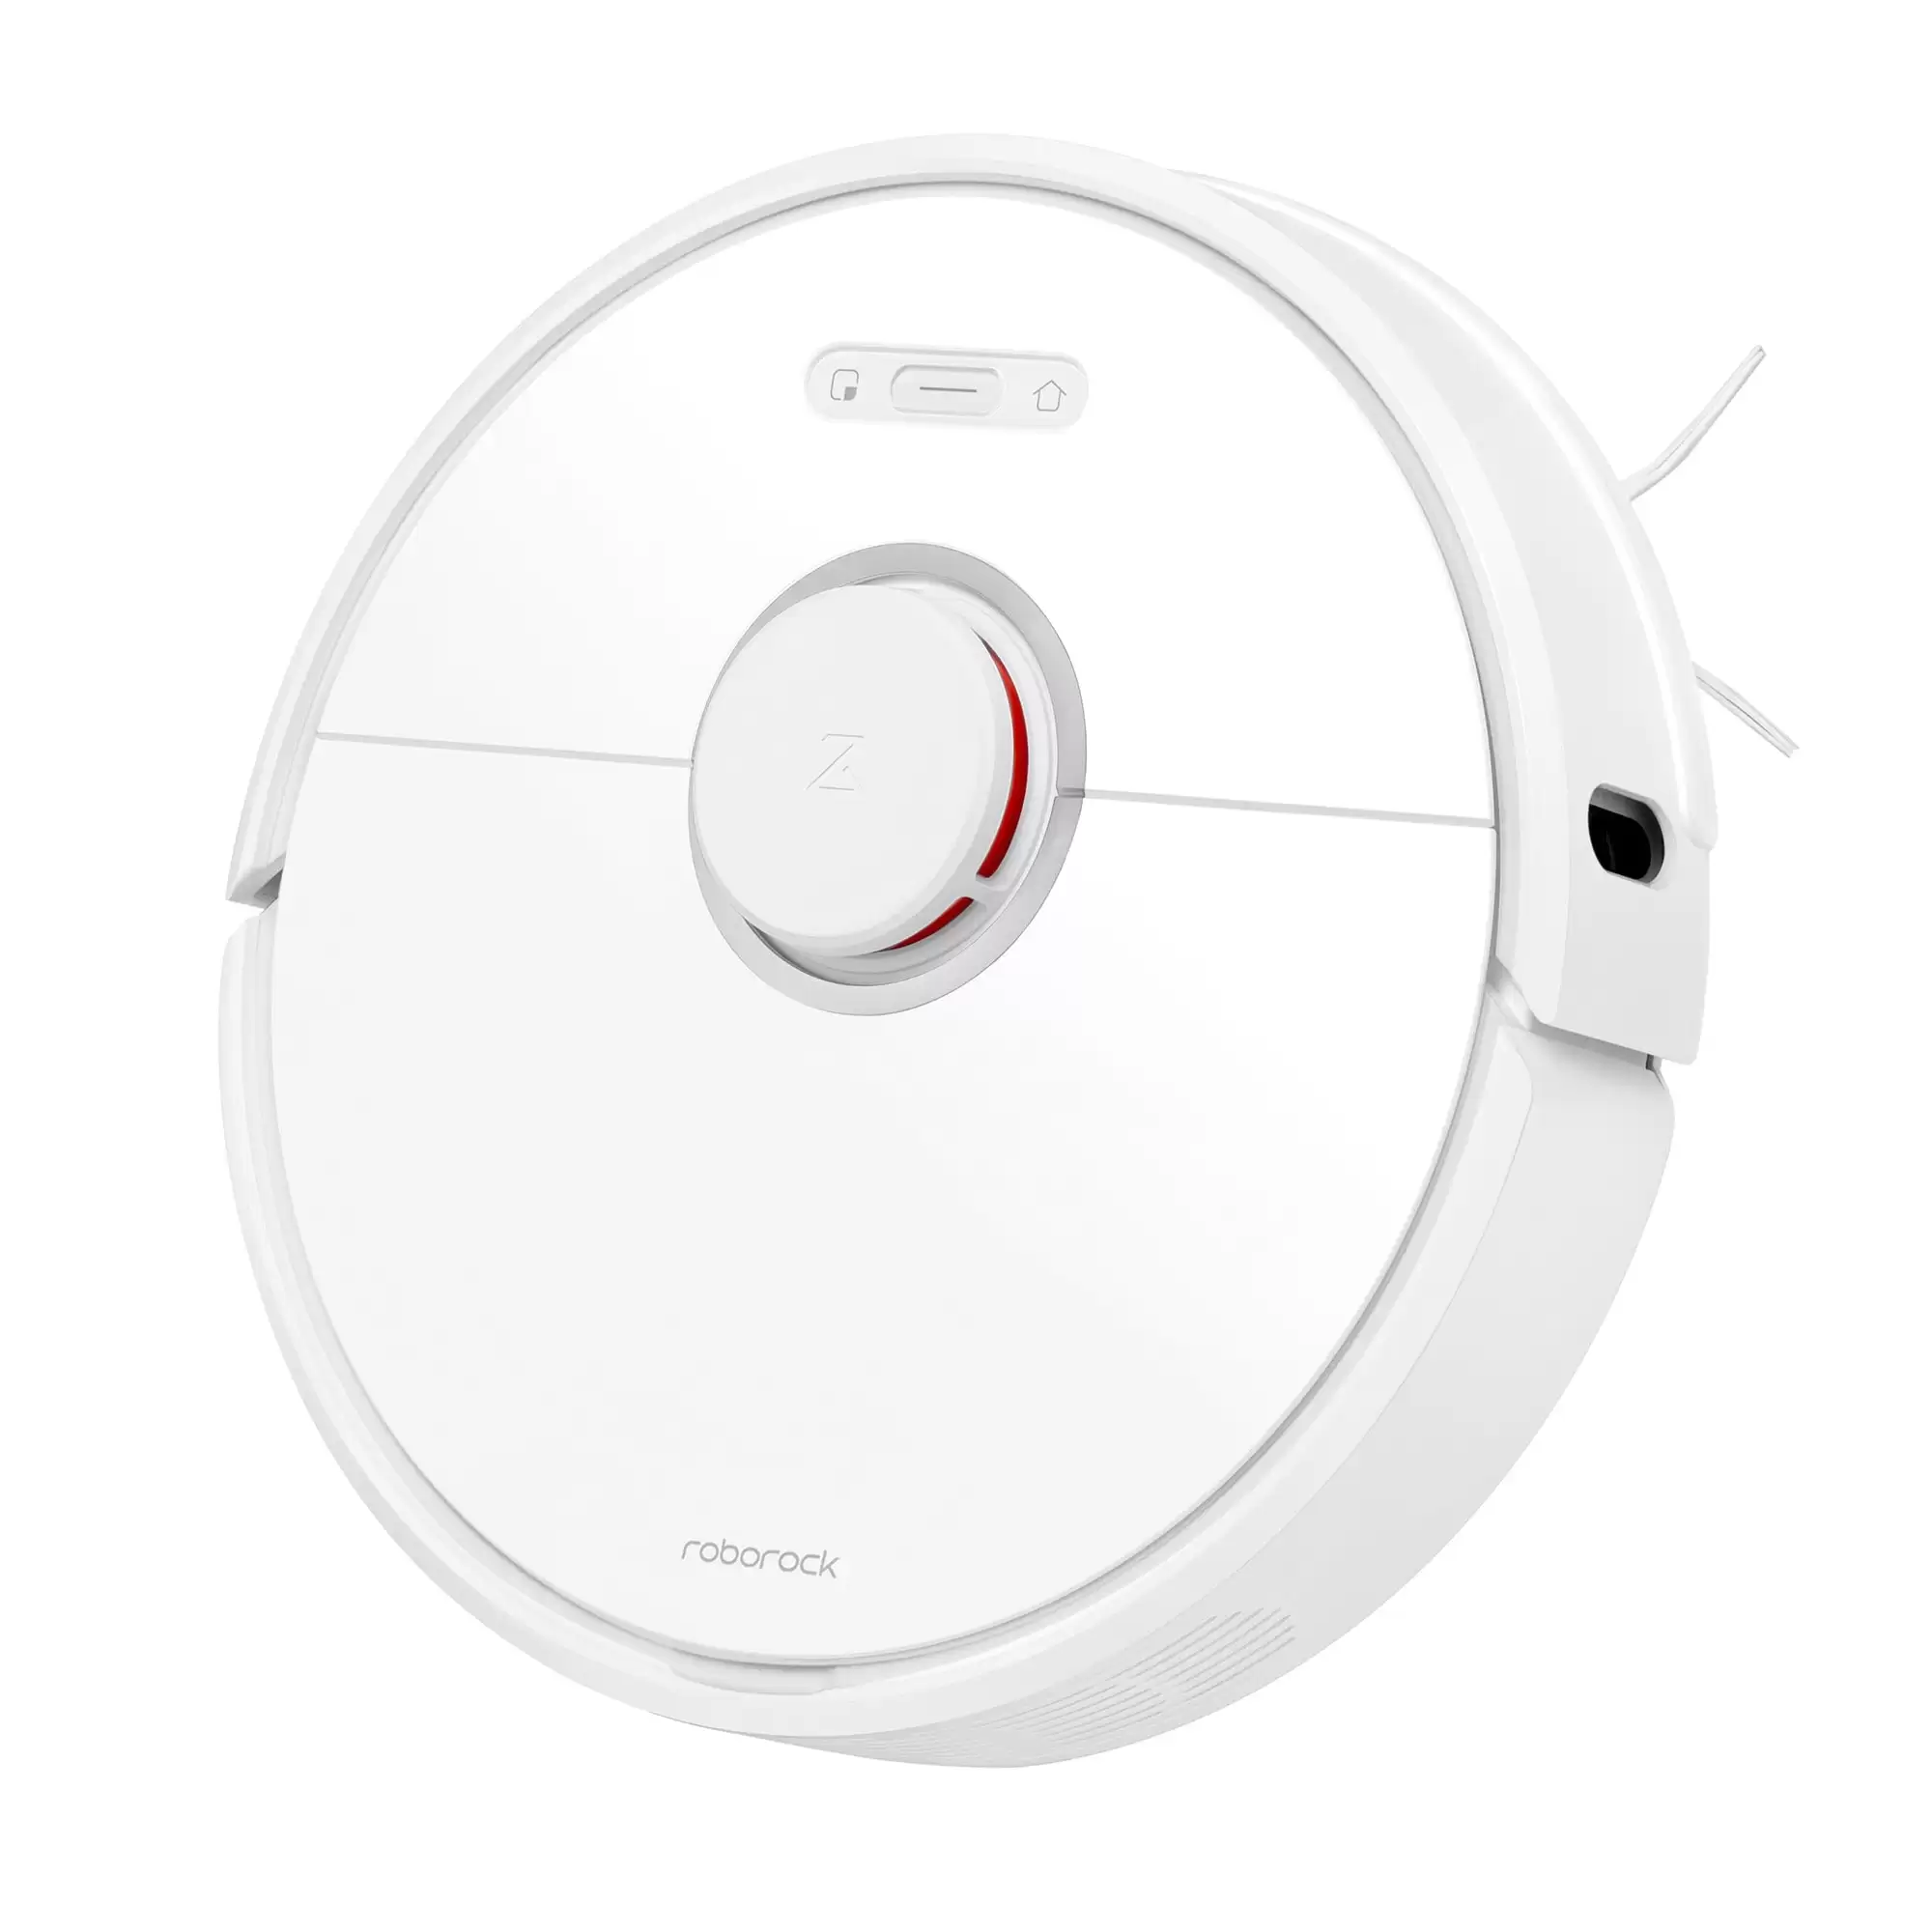 Order In Just $569.99 Roborock S6 Lds Scanning Slam Algorithm Robot Vacuum Cleaner From Xiaomi Youpin At Gearbest With This Coupon